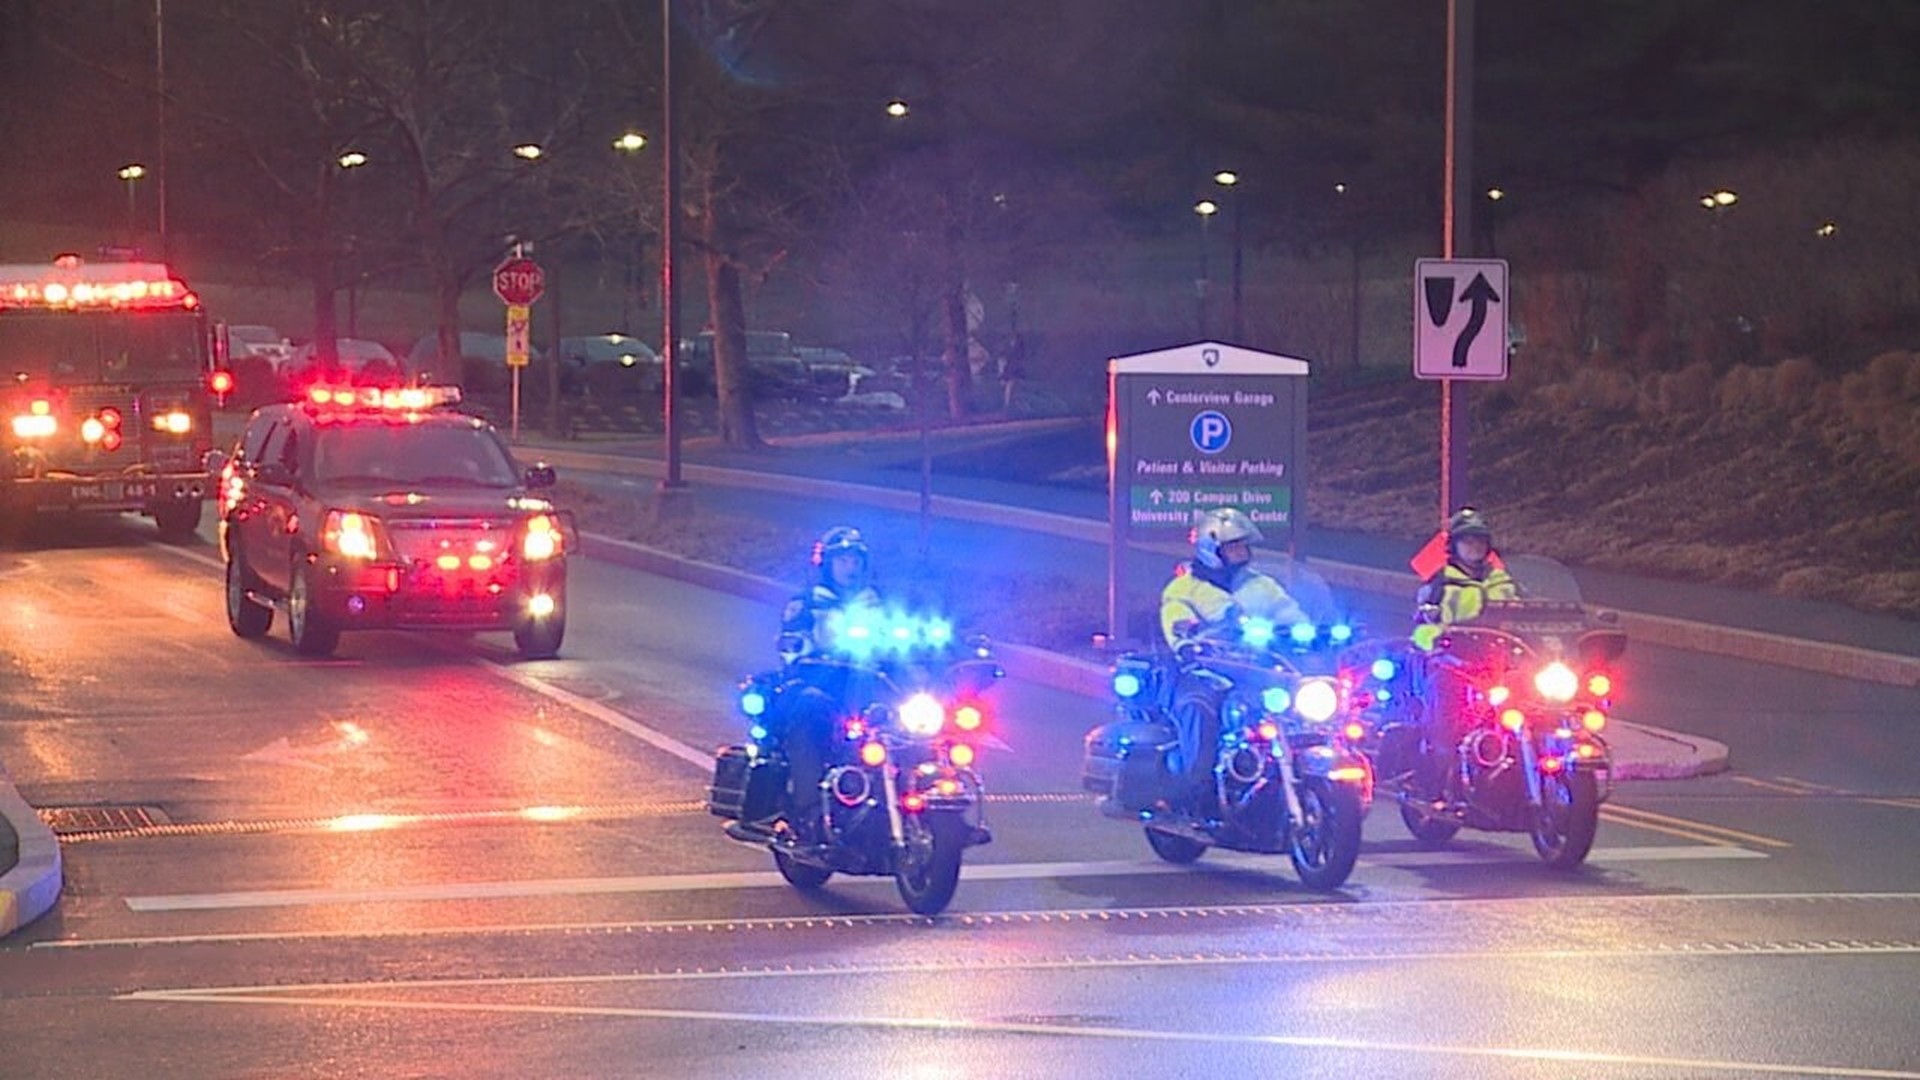 At least 100 vehicles representing more than 75 organizations took part in the first "Light Up The Night" event on March 23 at Penn State Health Children's Hospital.